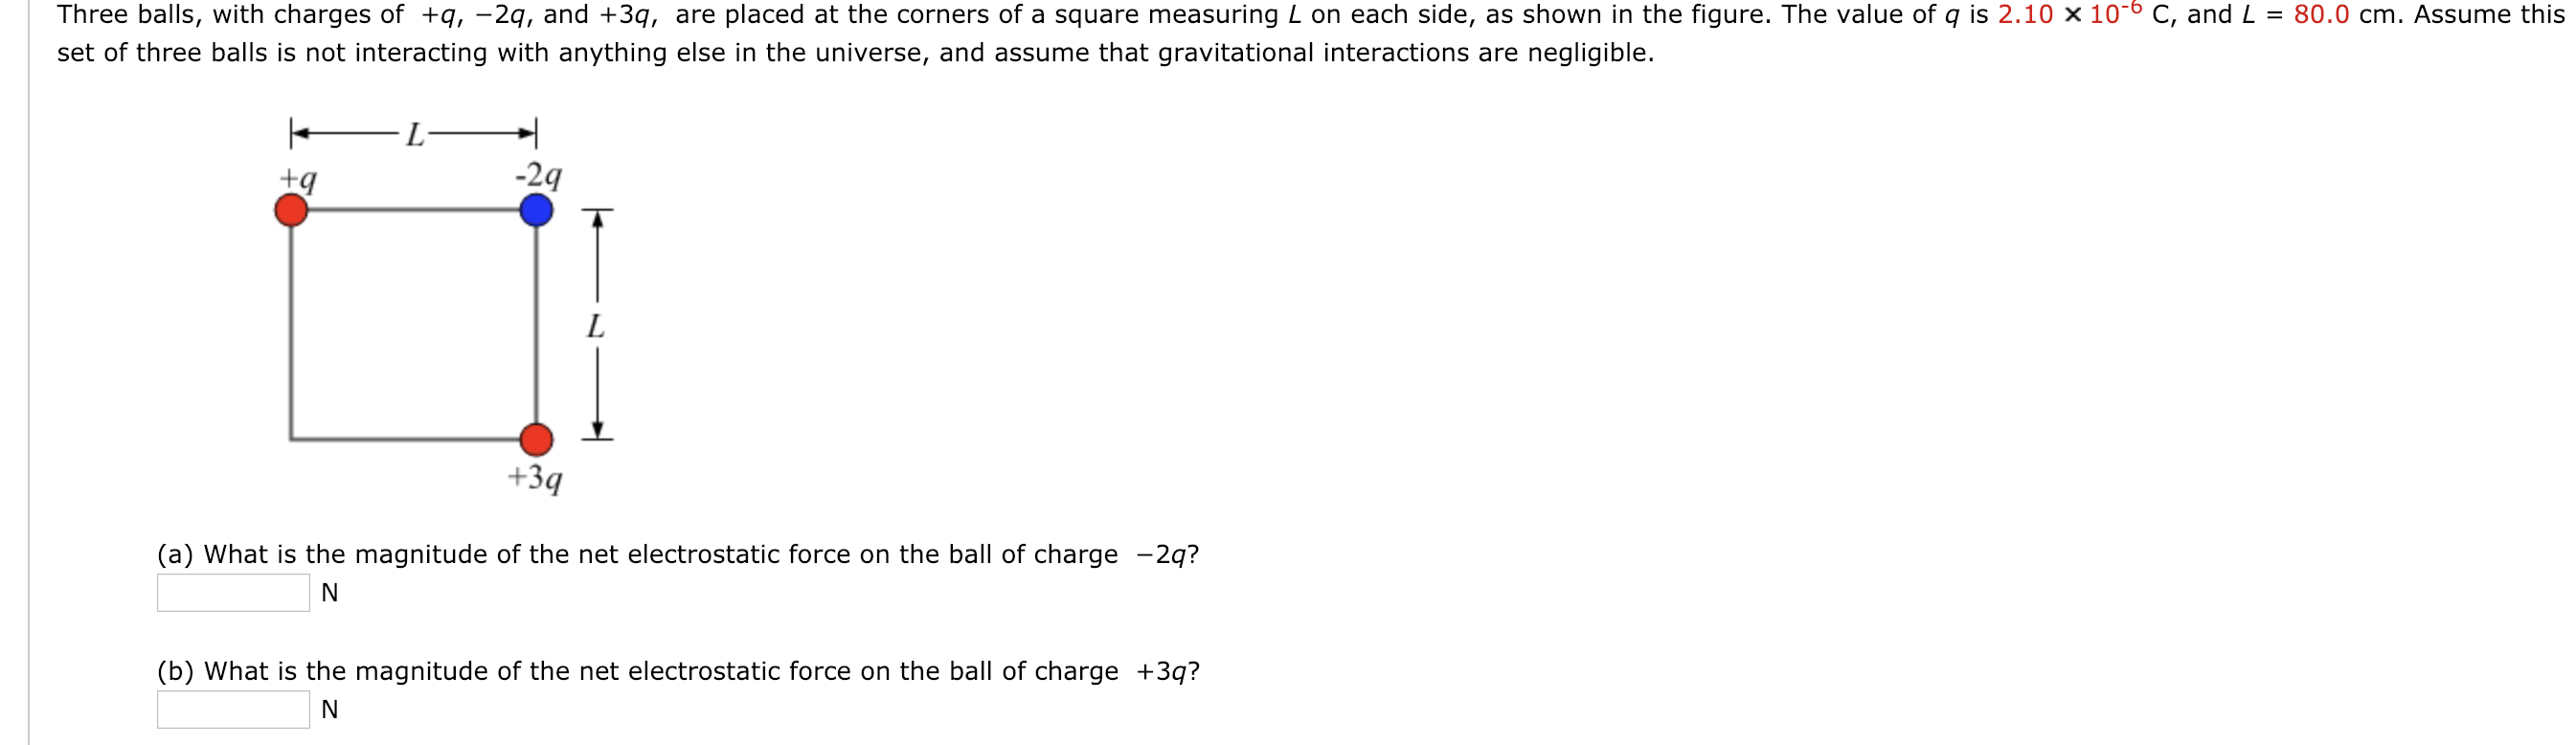 Three balls, with charges of +q,-2q, and +3q, are placed at the corners of a square measuring L on each side, as shown in the figure. The value of q is 2.10 x 10-6 C, and L = 80.0 cm. Assume this
set of three balls is not interacting with anything else in the universe, and assume that gravitational interactions are negligible.
-2q
+3q
(a) What is the magnitude of the net electrostatic force on the ball of charge -2q?
(b) What is the magnitude of the net electrostatic force on the ball of charge +3q?
